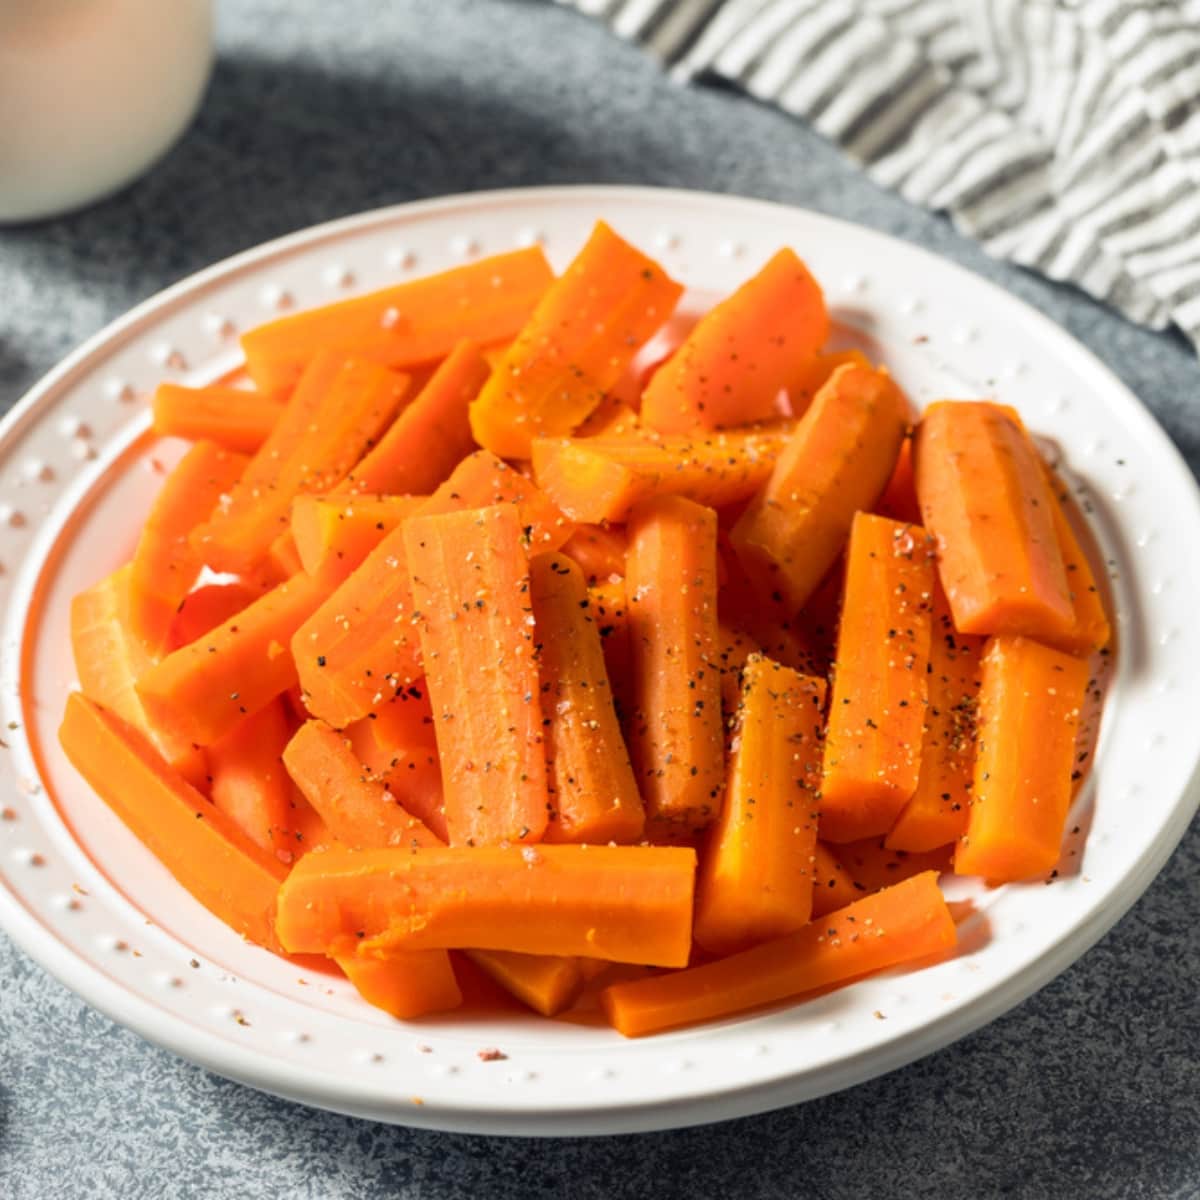 Healthy Homemade Microwave Steamed Carrots on a Plate, Seasoned with Salt and Pepper